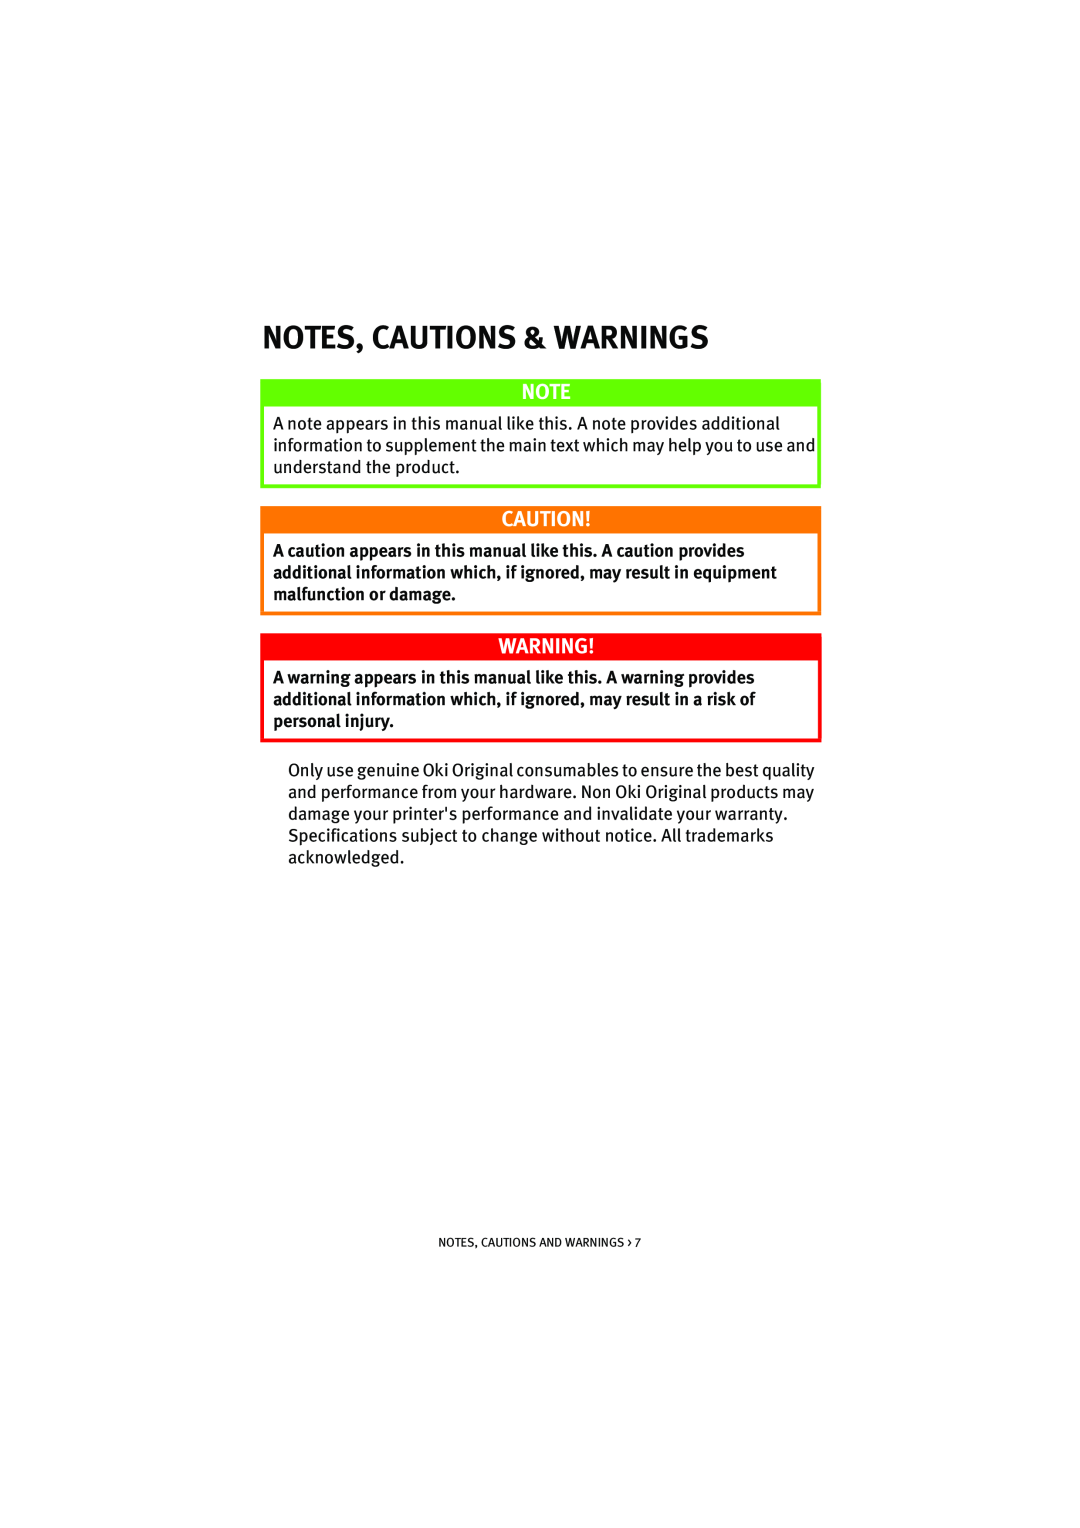 Oki S700 manual Notes, Cautions & Warnings, Notes, Cautions And Warnings 